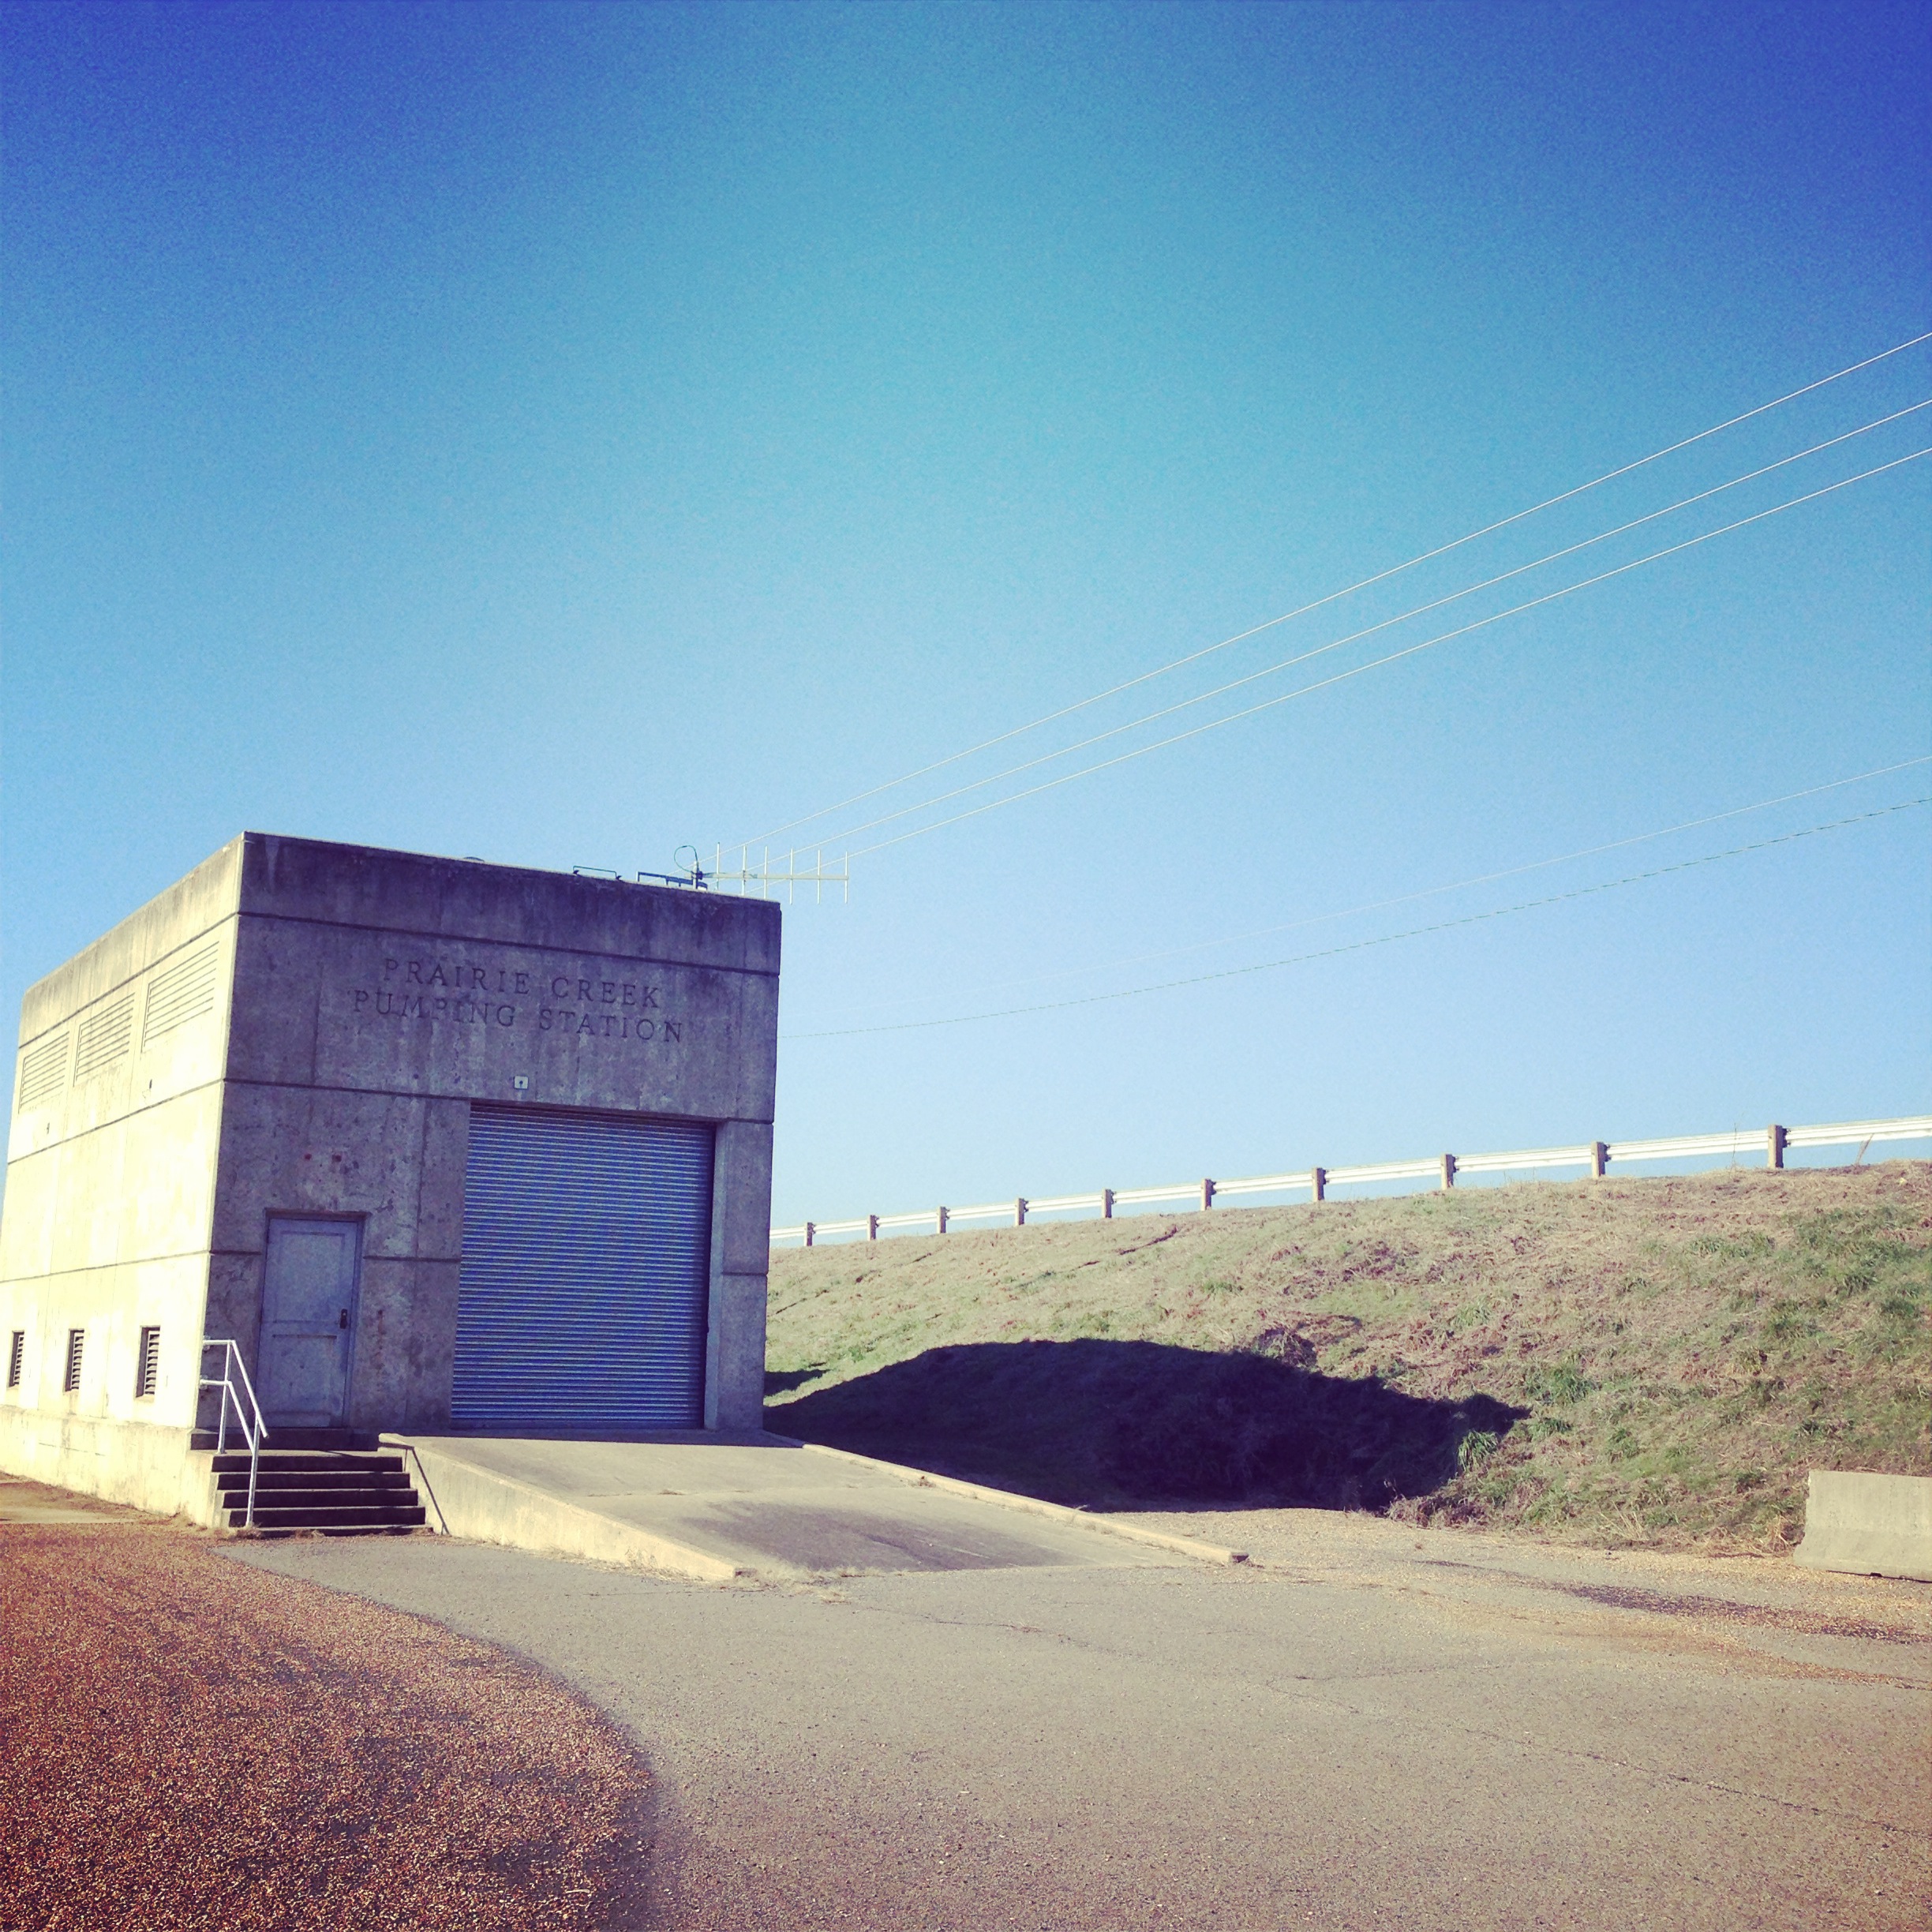 A public facilities building at Bona Dea Trail in Russellville, Arkansas: a simple concrete warehouse. The garage door is approached by a simple concrete ramp.